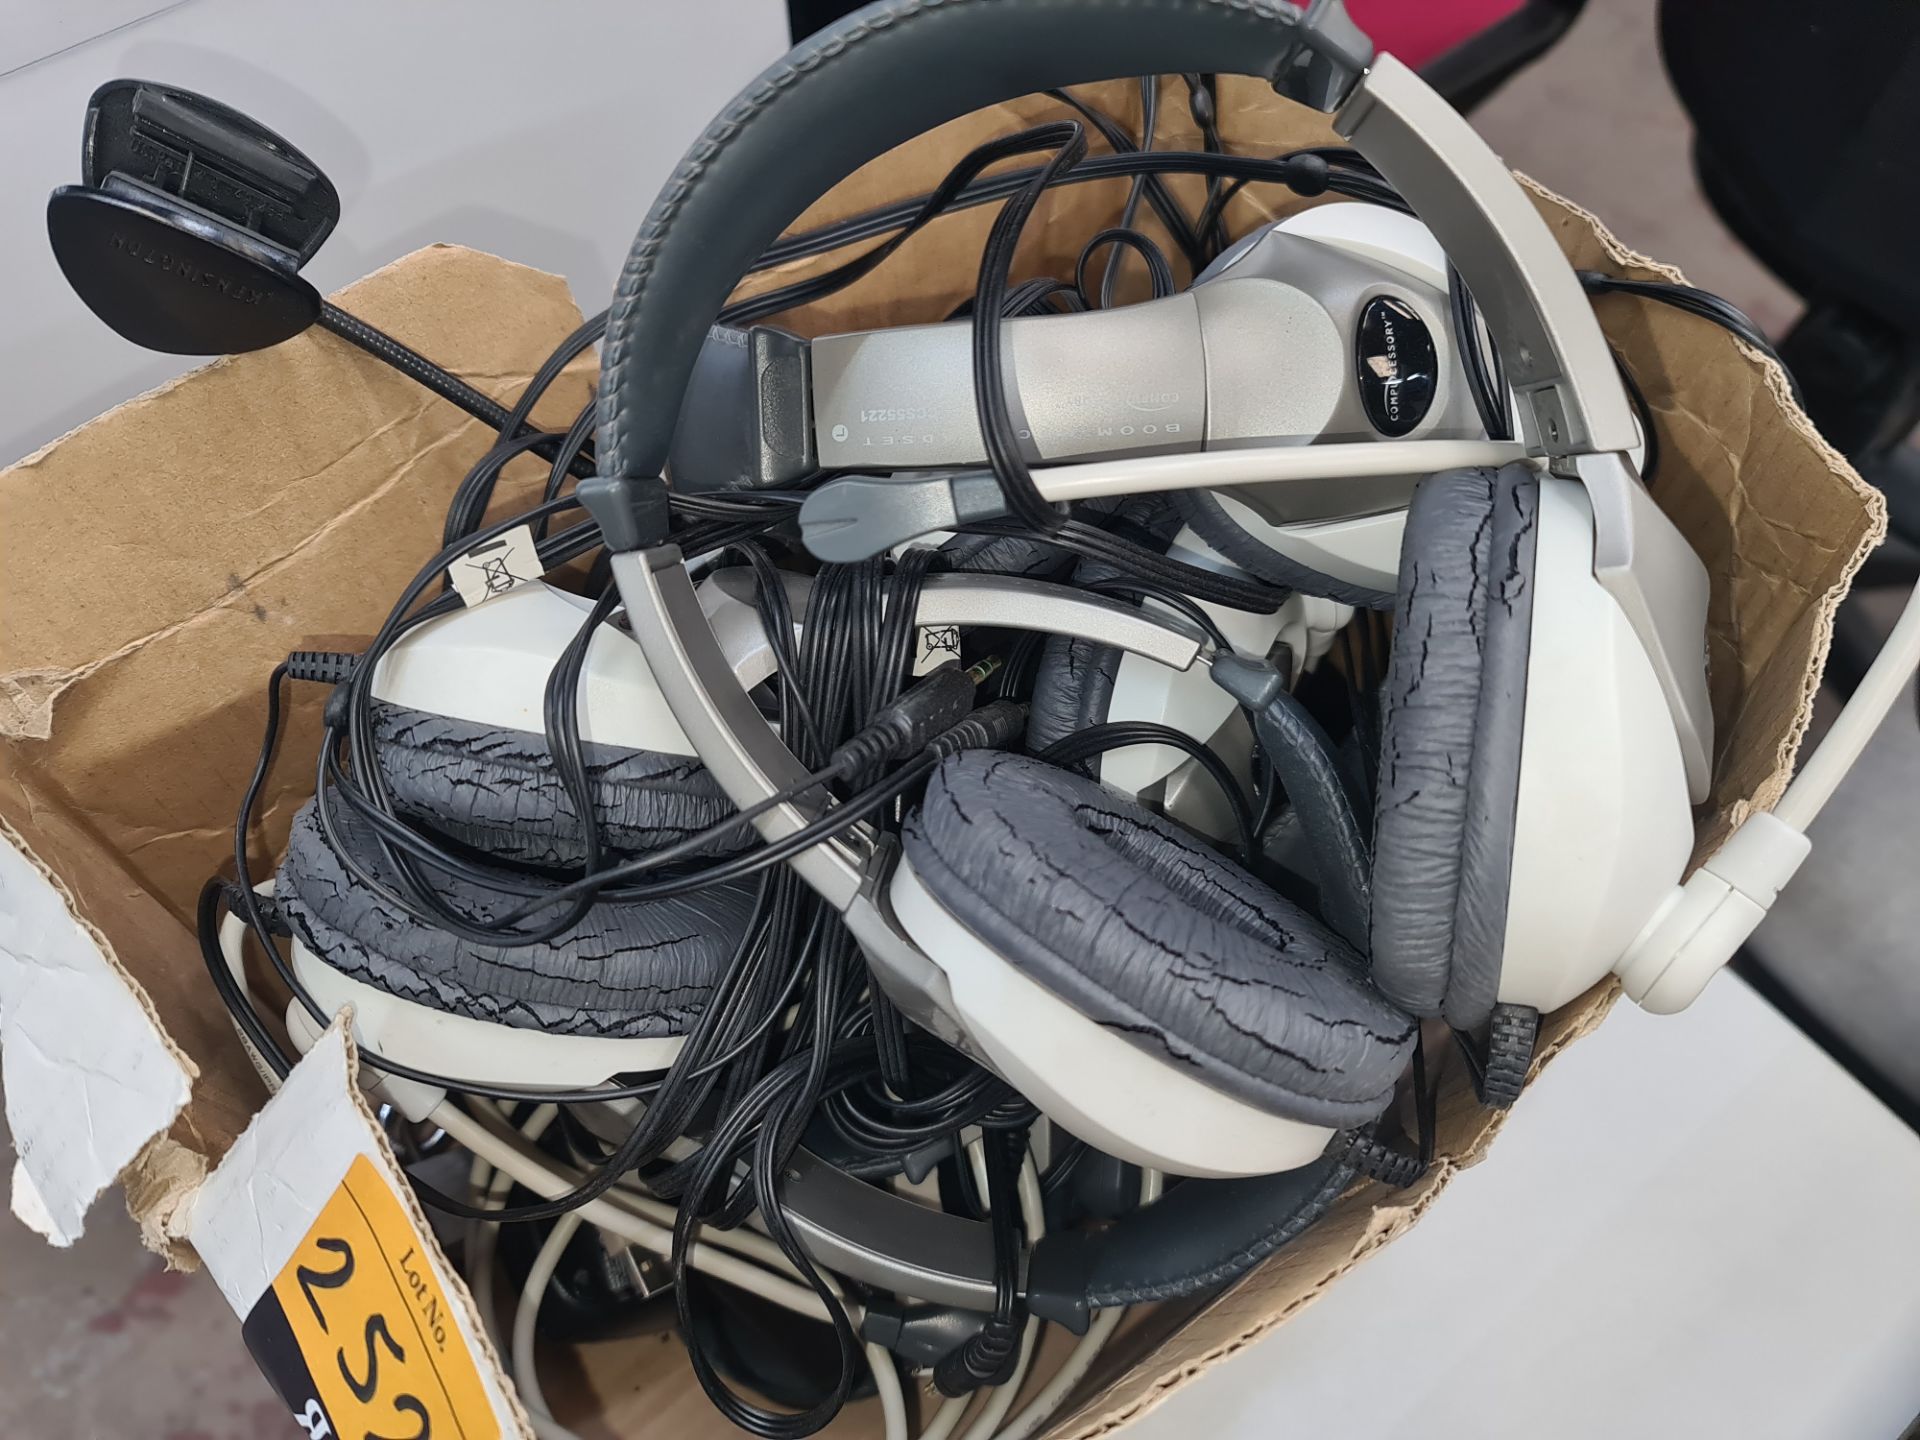 7 off Compucessory boom mic headsets plus other IT related items - Image 3 of 7